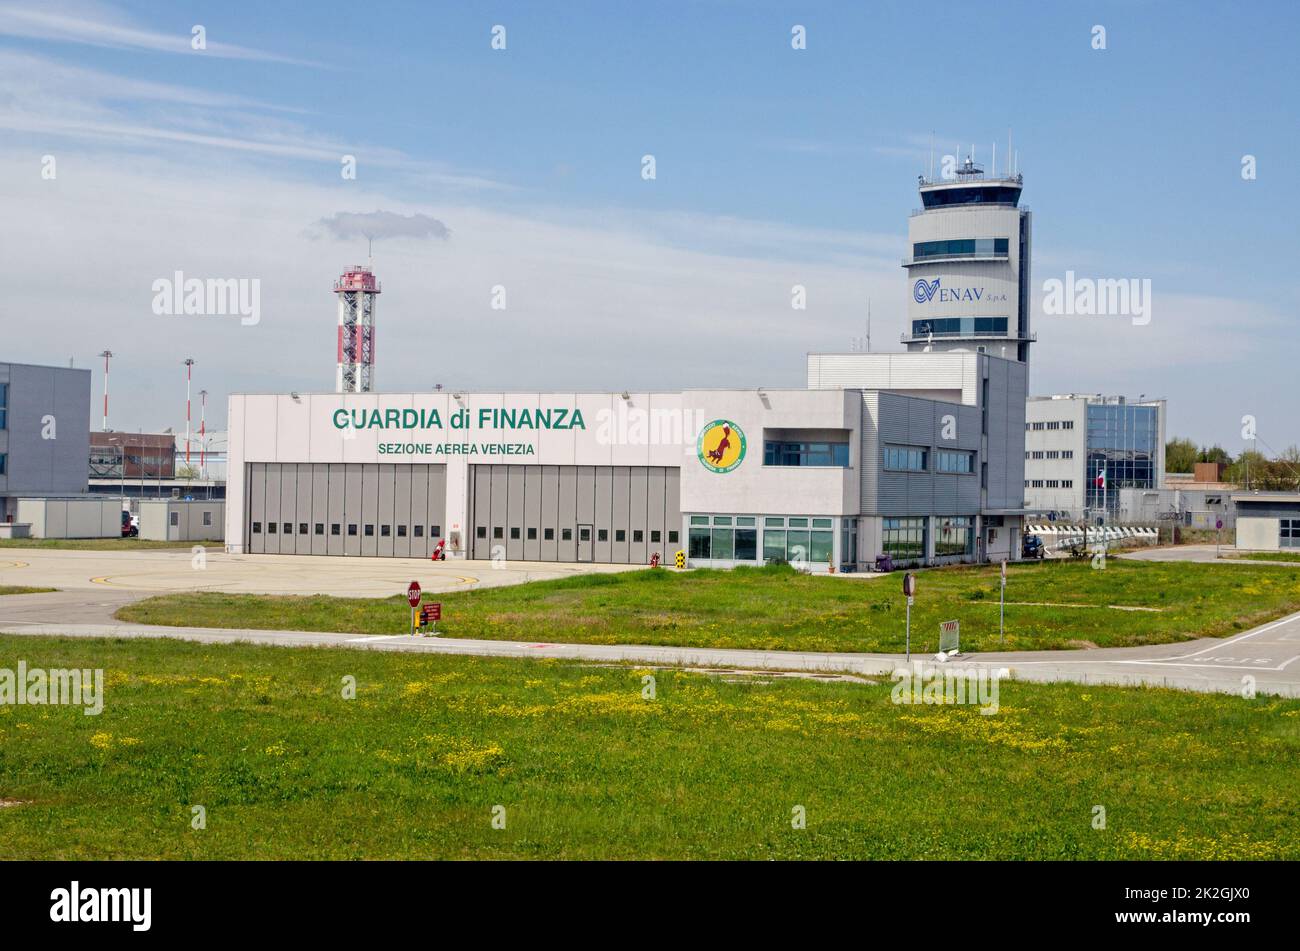 Venice, Italy - April 19, 2022:  Hangars and offices of the Aerial Section of Italy's Guardia di Finanza at Venice's Marco Polo Airport.  The Guardia Stock Photo